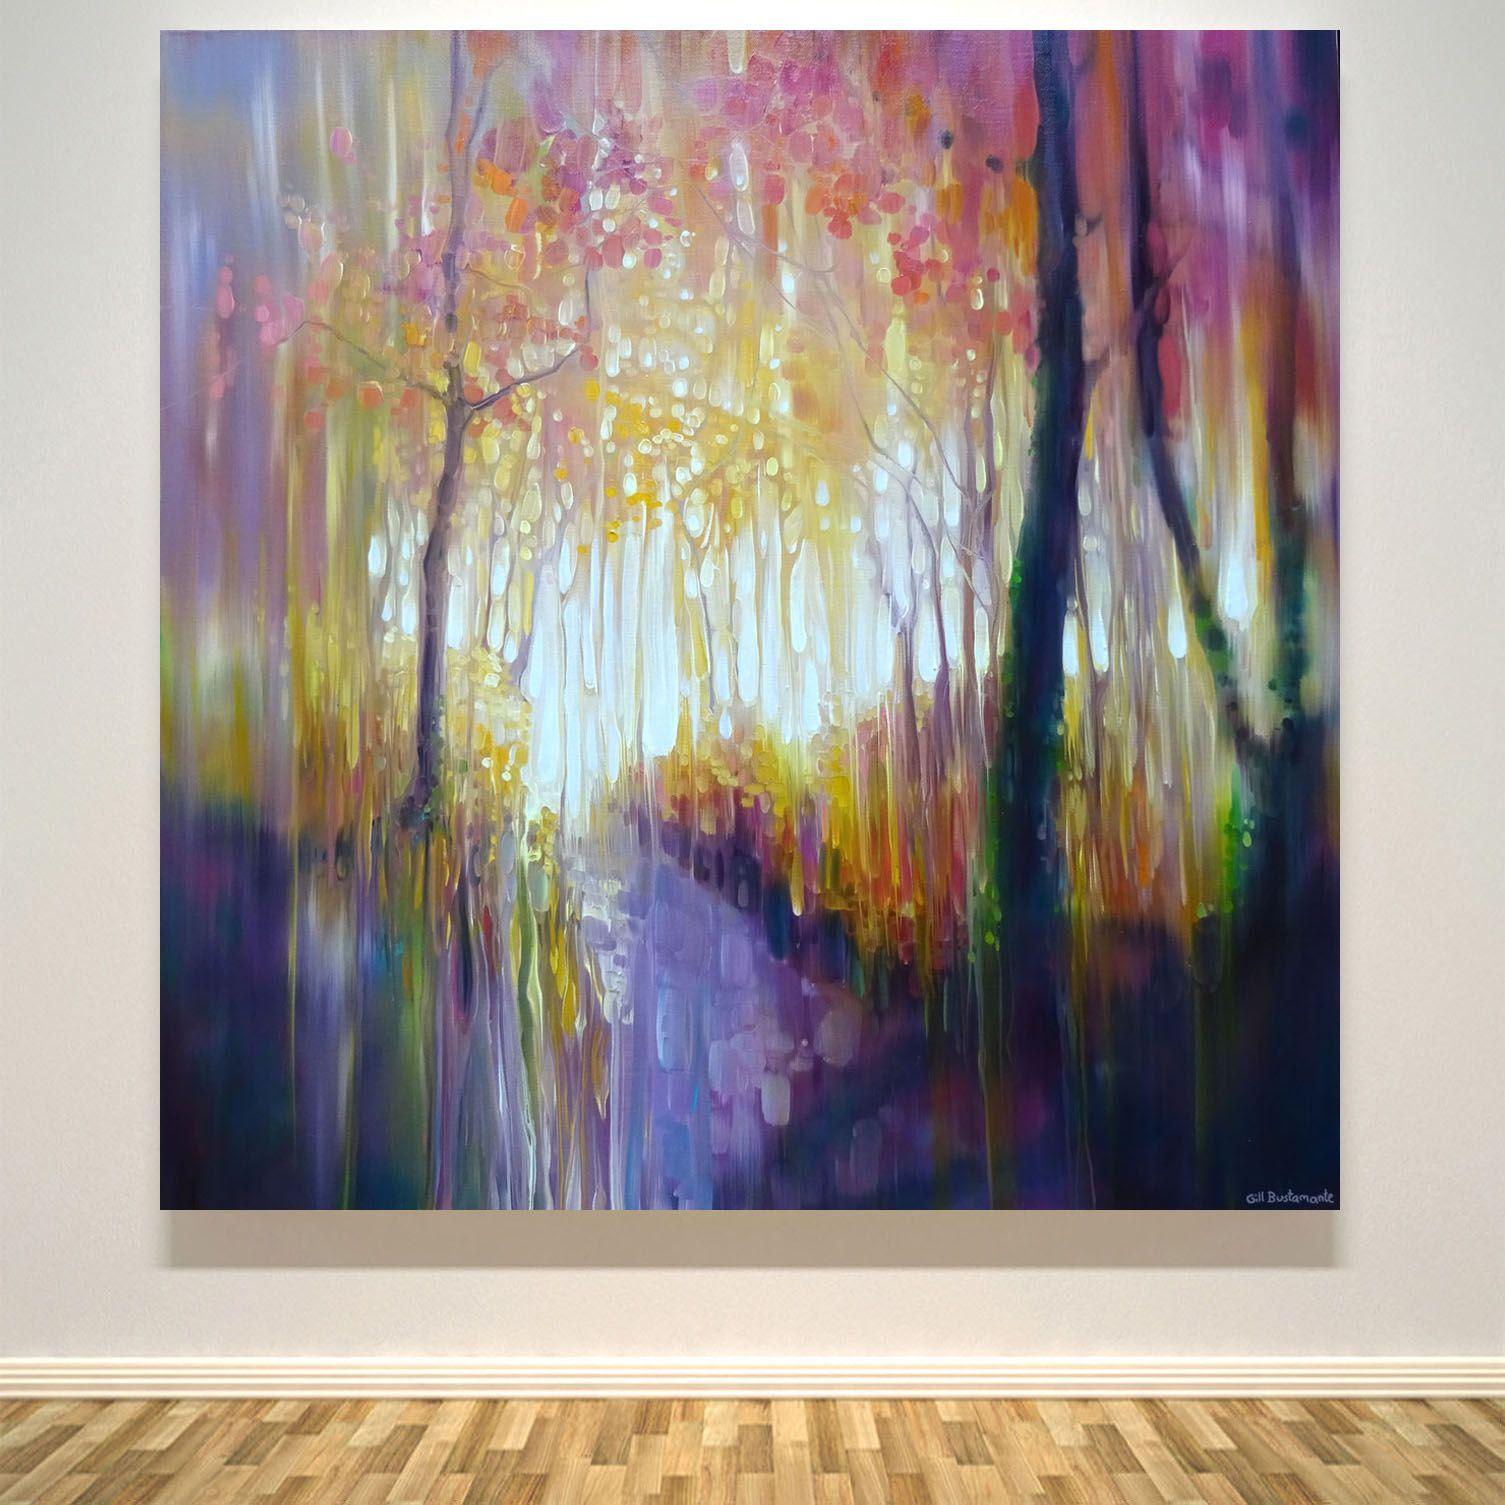 October Glows, Painting, Oil on Canvas 1